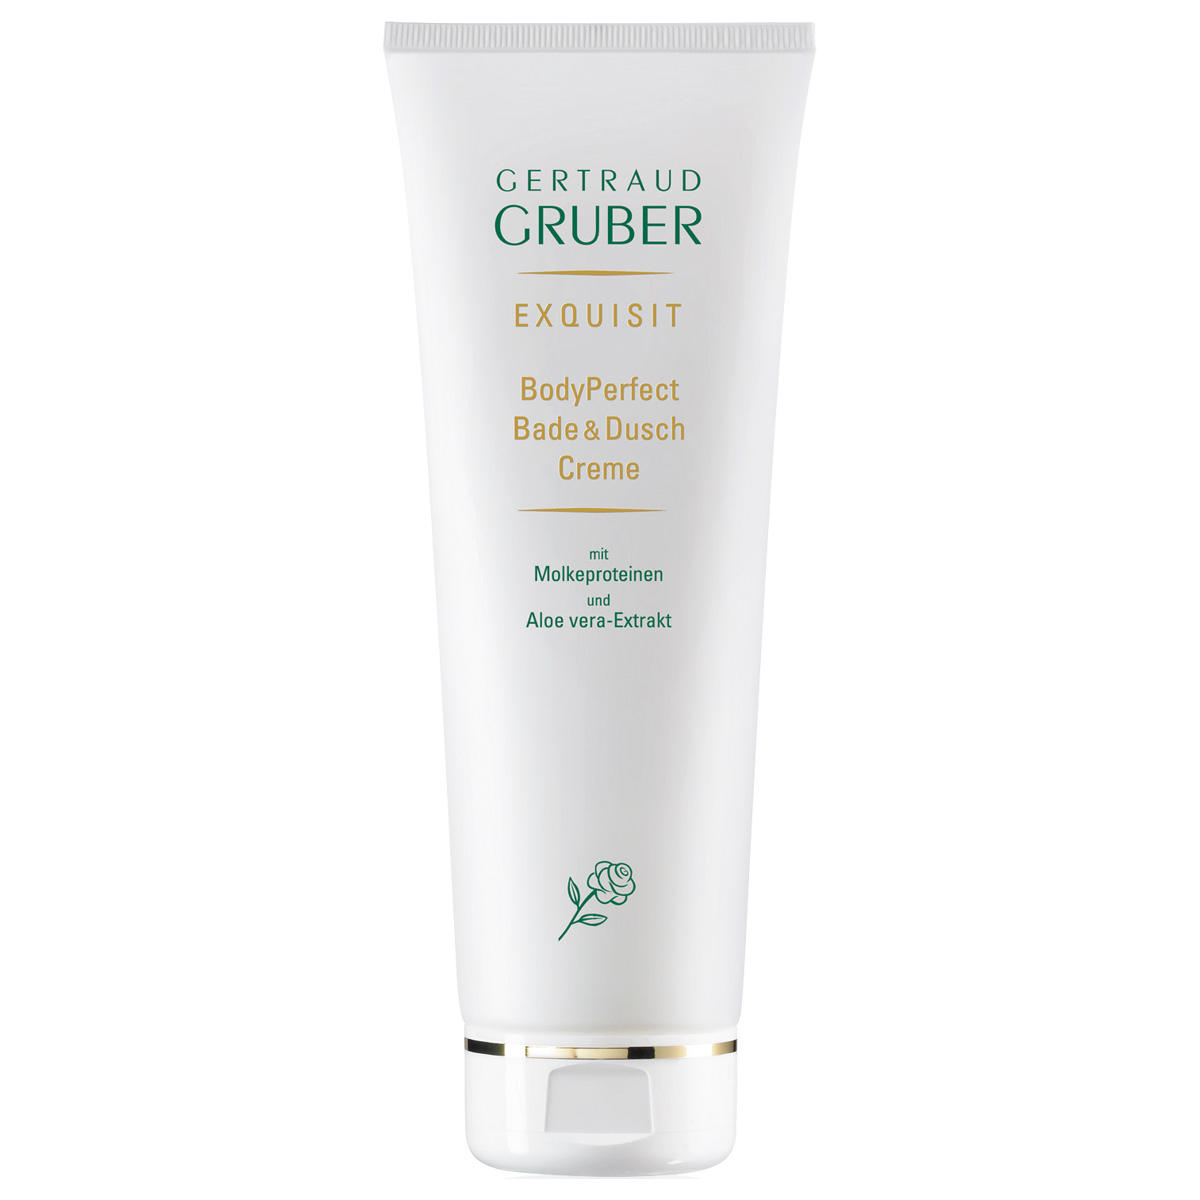 GERTRAUD GRUBER EXQUISIT Body Perfect Bade & Dusch Creme 250 ml - 1